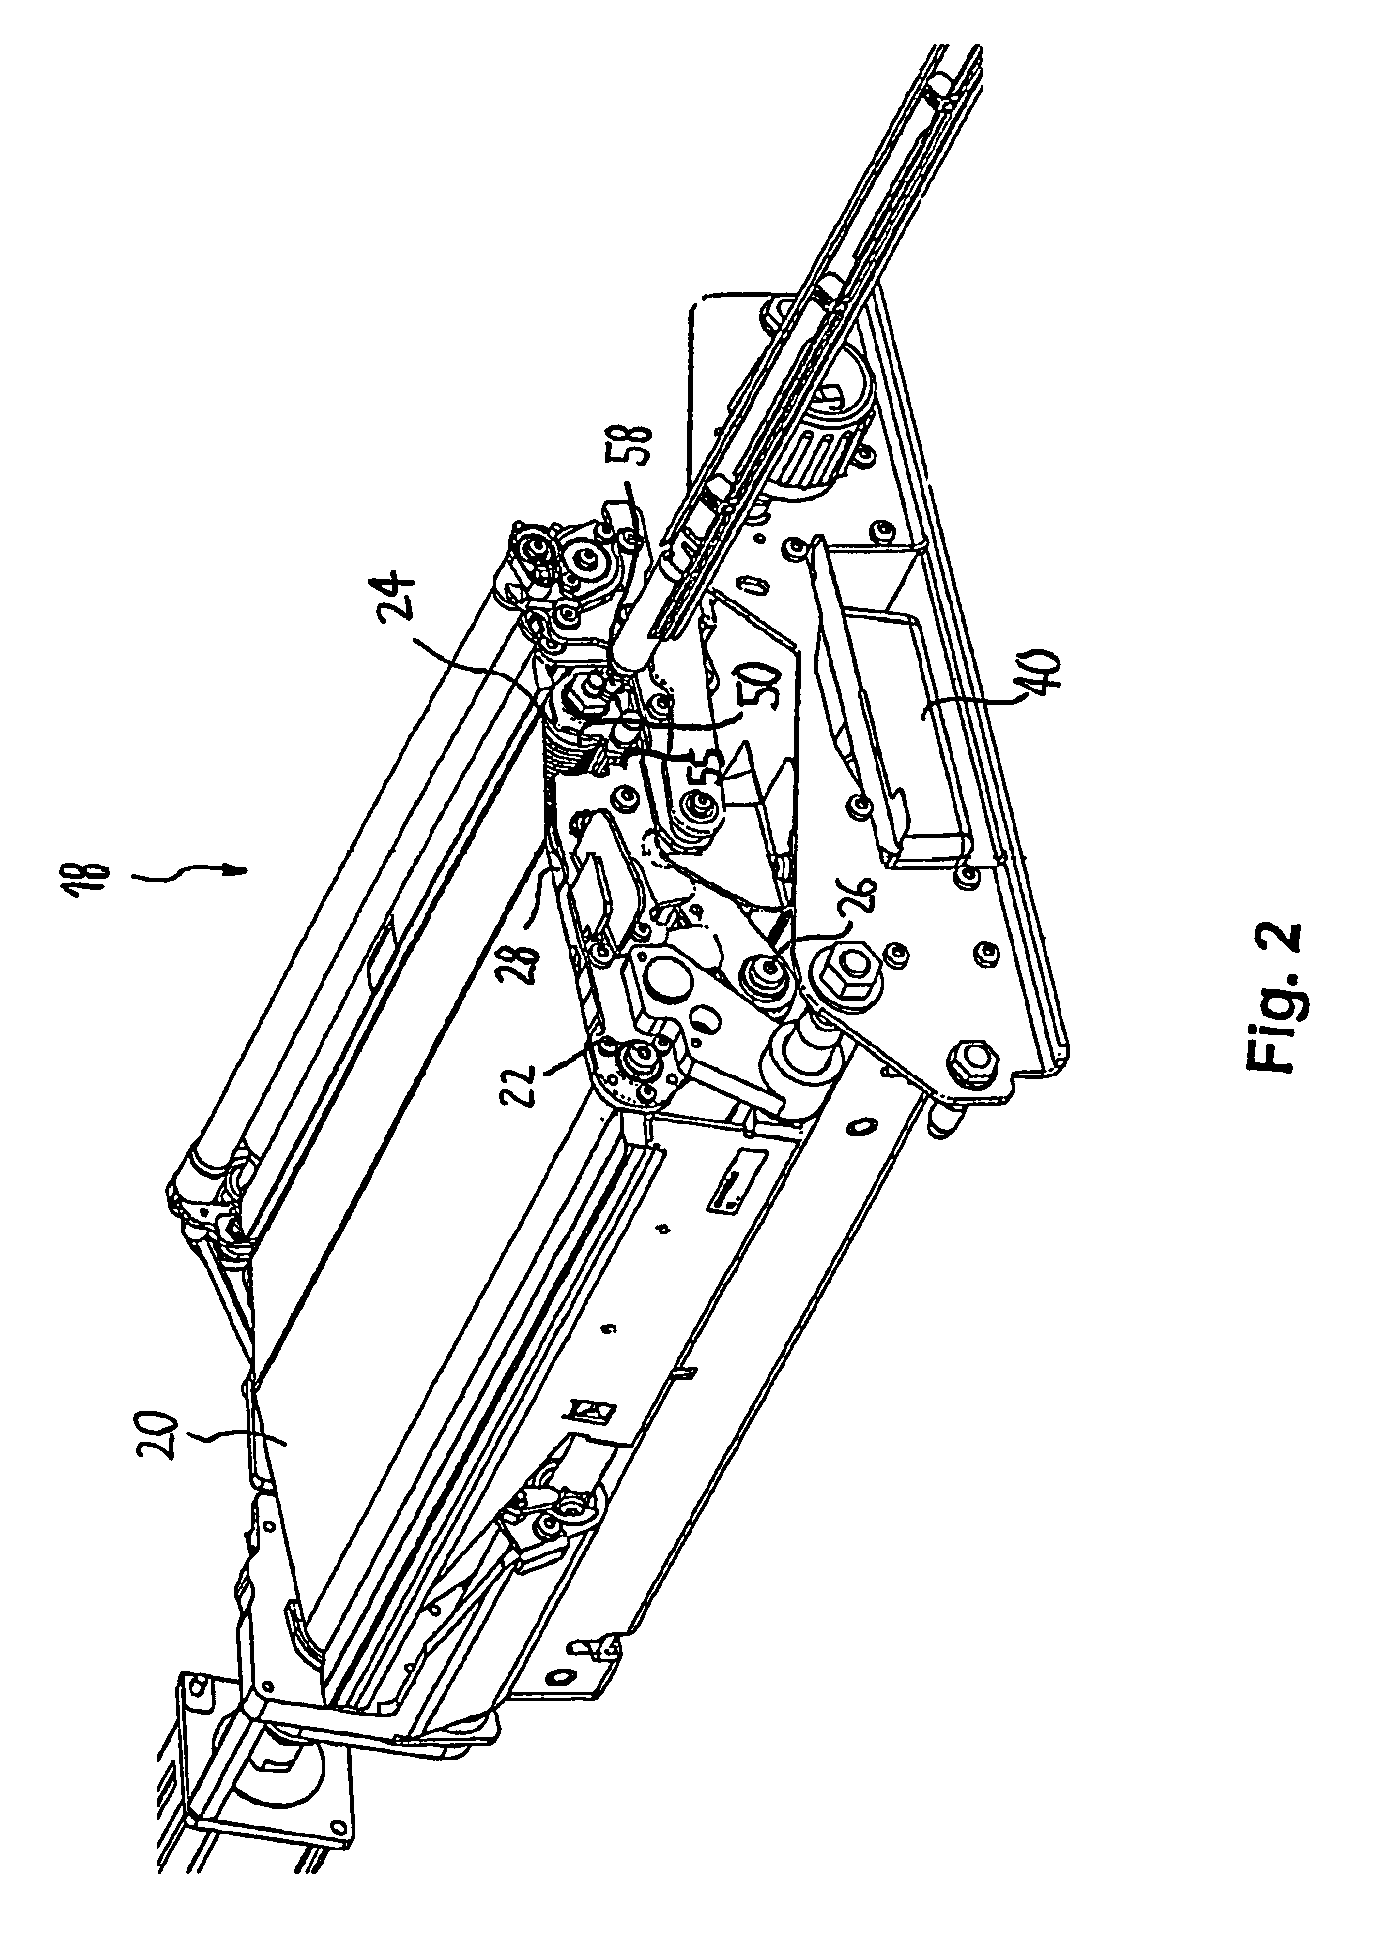 Device and method for charging a media transport belt conveyor in a printer or copier